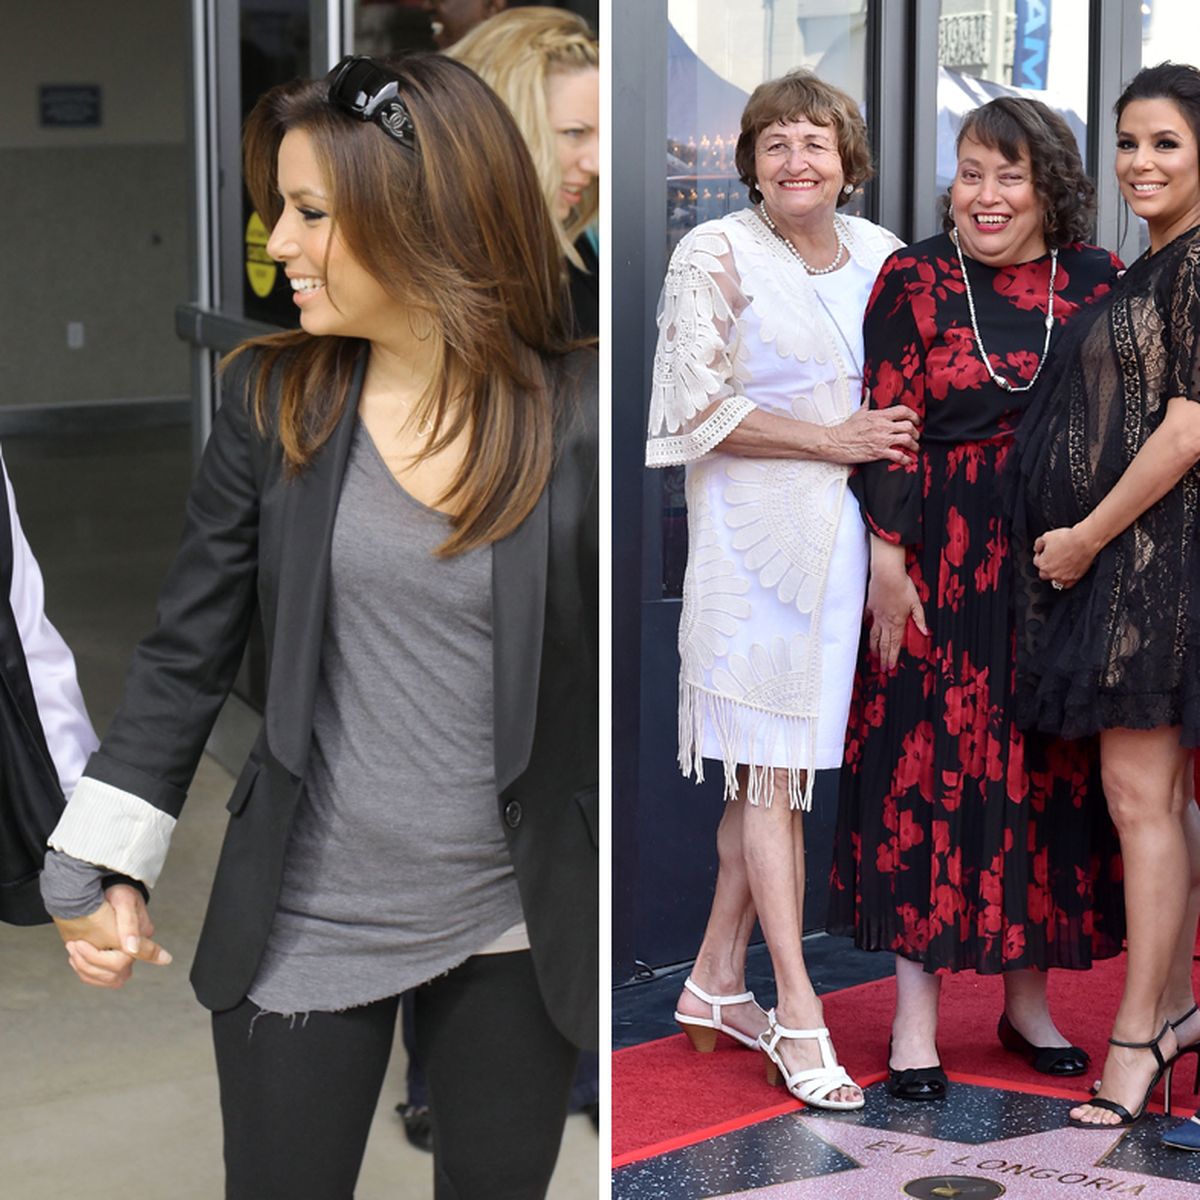 Eva Longoria opens up about older sister with special needs